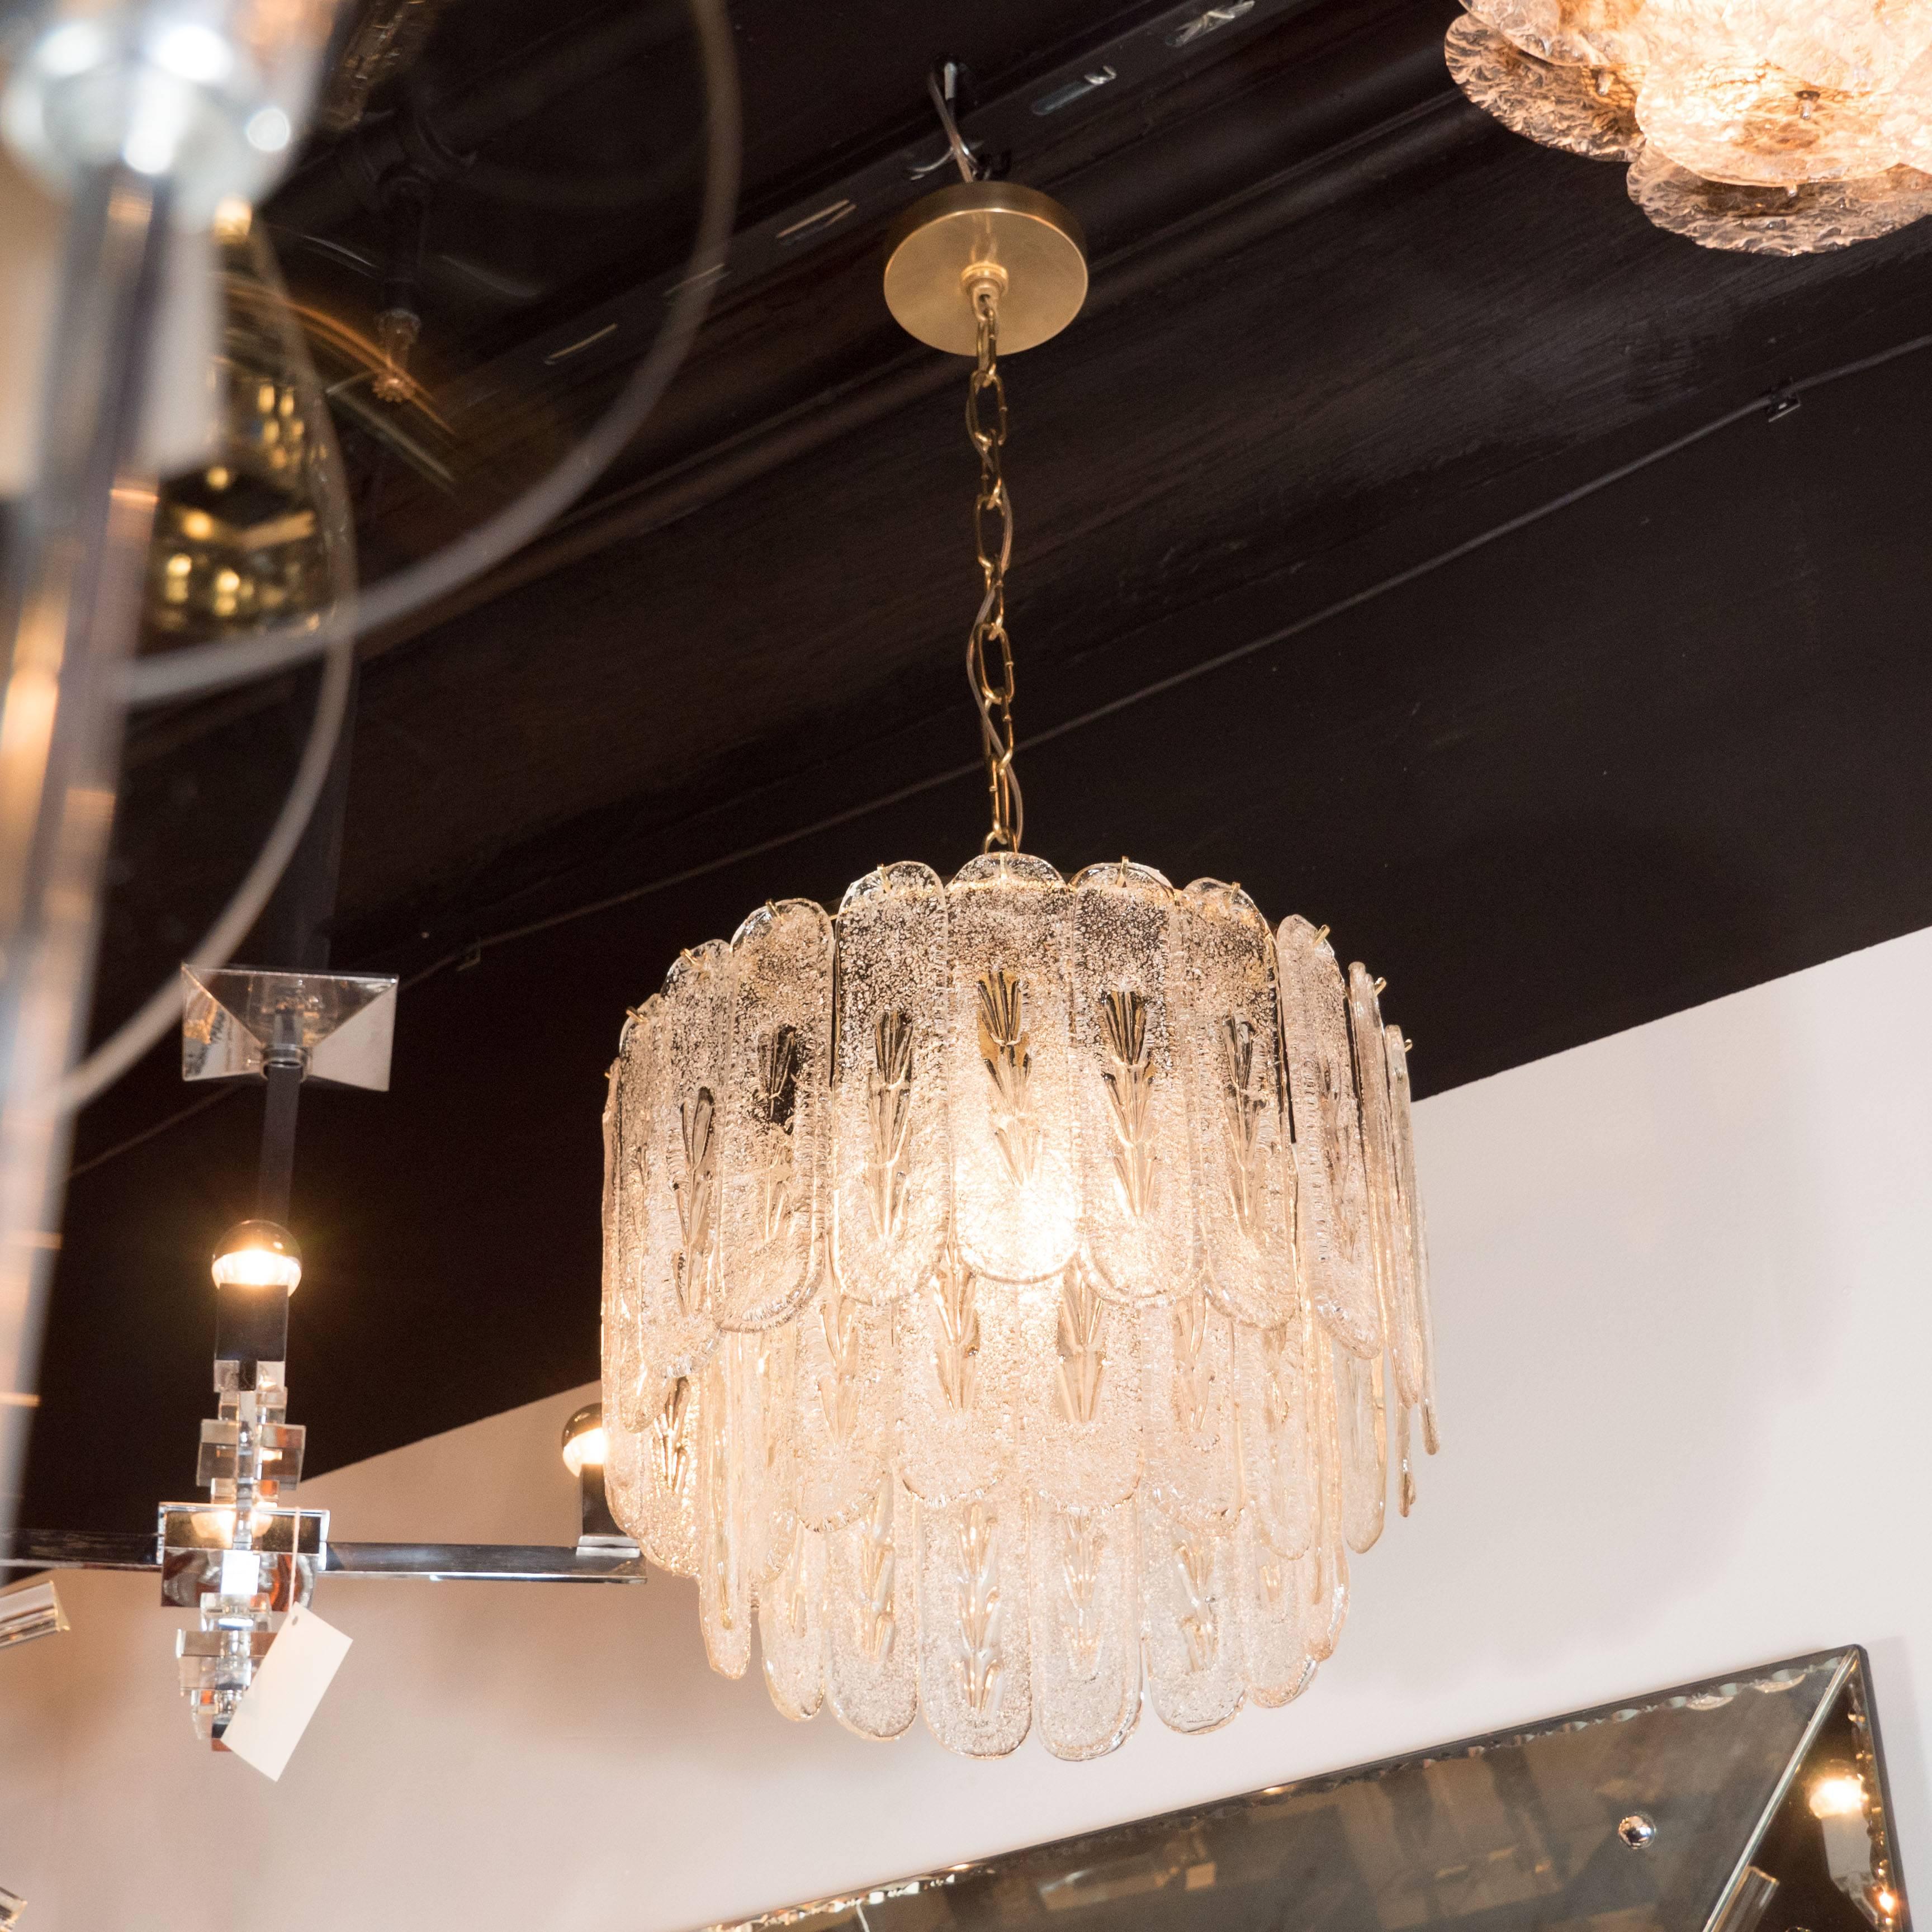 A chic Mid-Century Modernist two-tier Murano oblong textured glass disc chandelier, the handblown Murano oblond textured glass discs are individually hung across two concentric tiers, forming an elegant, flowing aesthetic. Brass fittings and